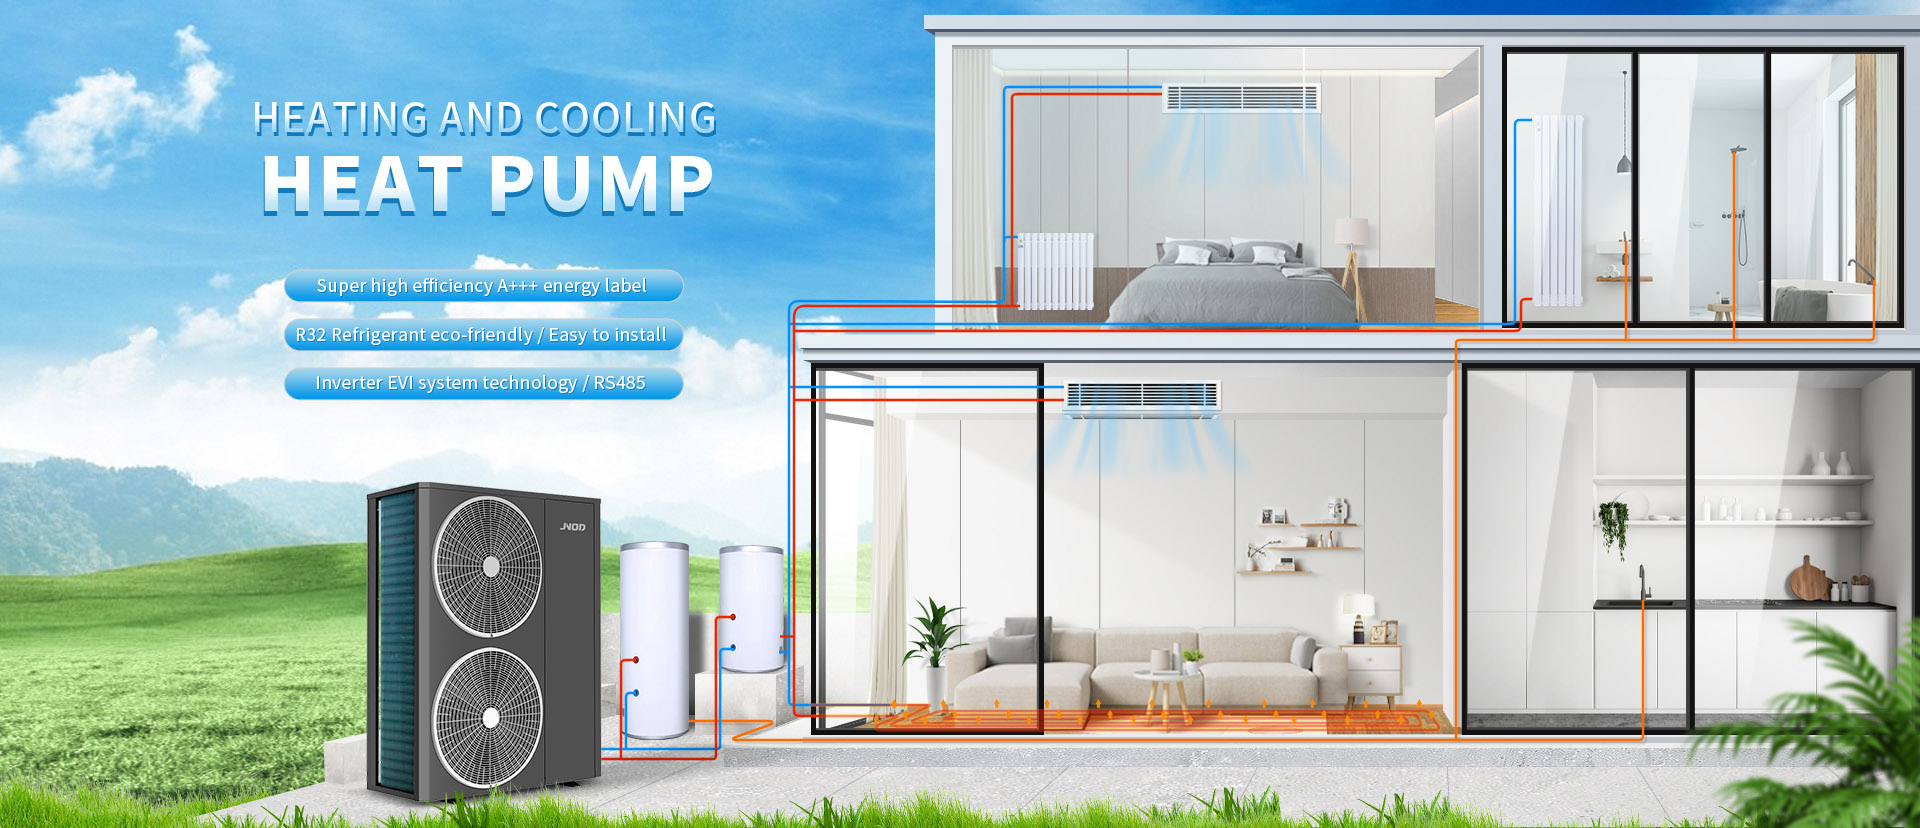 Heating And Cooling Heat Pump export